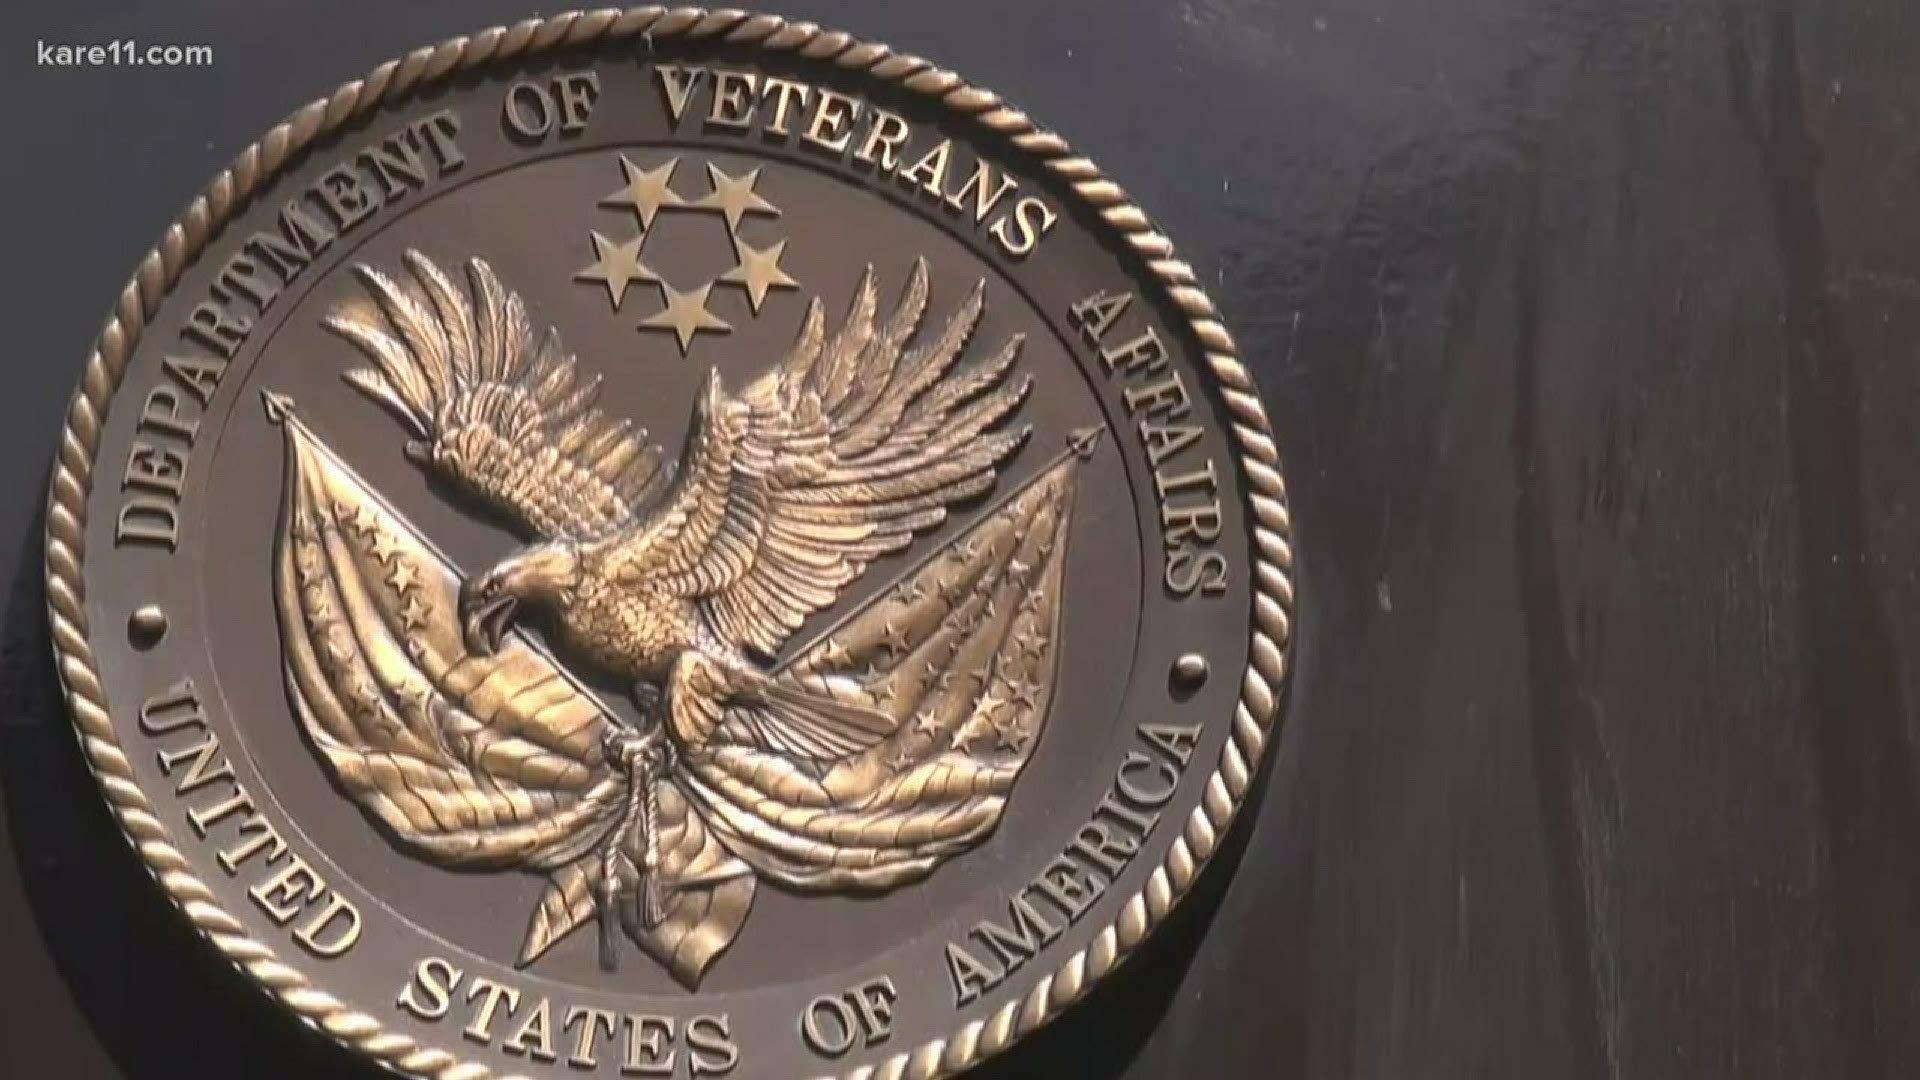 A KARE 11 investigation reveals veterans have been denied benefits for not going to exams the VA had already ordered cancelled due to the COVID-19 pandemic.